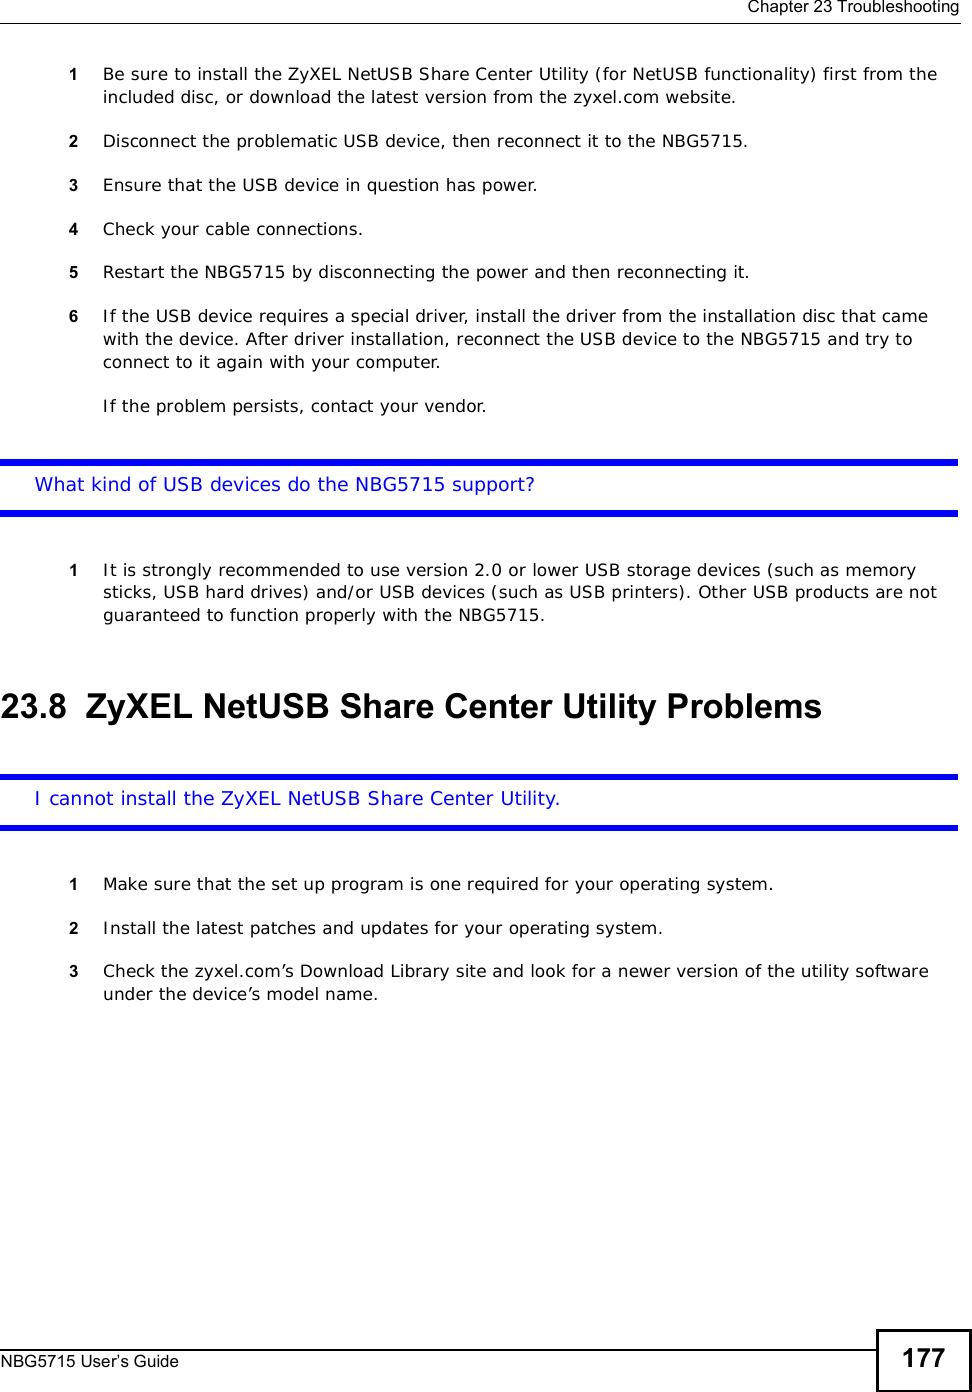  Chapter 23TroubleshootingNBG5715 User’s Guide 1771Be sure to install the ZyXEL NetUSB Share Center Utility (for NetUSB functionality) first from the included disc, or download the latest version from the zyxel.com website. 2Disconnect the problematic USB device, then reconnect it to the NBG5715.3Ensure that the USB device in question has power.4Check your cable connections.5Restart the NBG5715 by disconnecting the power and then reconnecting it.6If the USB device requires a special driver, install the driver from the installation disc that came with the device. After driver installation, reconnect the USB device to the NBG5715 and try to connect to it again with your computer.If the problem persists, contact your vendor.What kind of USB devices do the NBG5715 support?1It is strongly recommended to use version 2.0 or lower USB storage devices (such as memory sticks, USB hard drives) and/or USB devices (such as USB printers). Other USB products are not guaranteed to function properly with the NBG5715.23.8  ZyXEL NetUSB Share Center Utility ProblemsI cannot install the ZyXEL NetUSB Share Center Utility.1Make sure that the set up program is one required for your operating system.2Install the latest patches and updates for your operating system.3Check the zyxel.com’s Download Library site and look for a newer version of the utility software under the device’s model name.